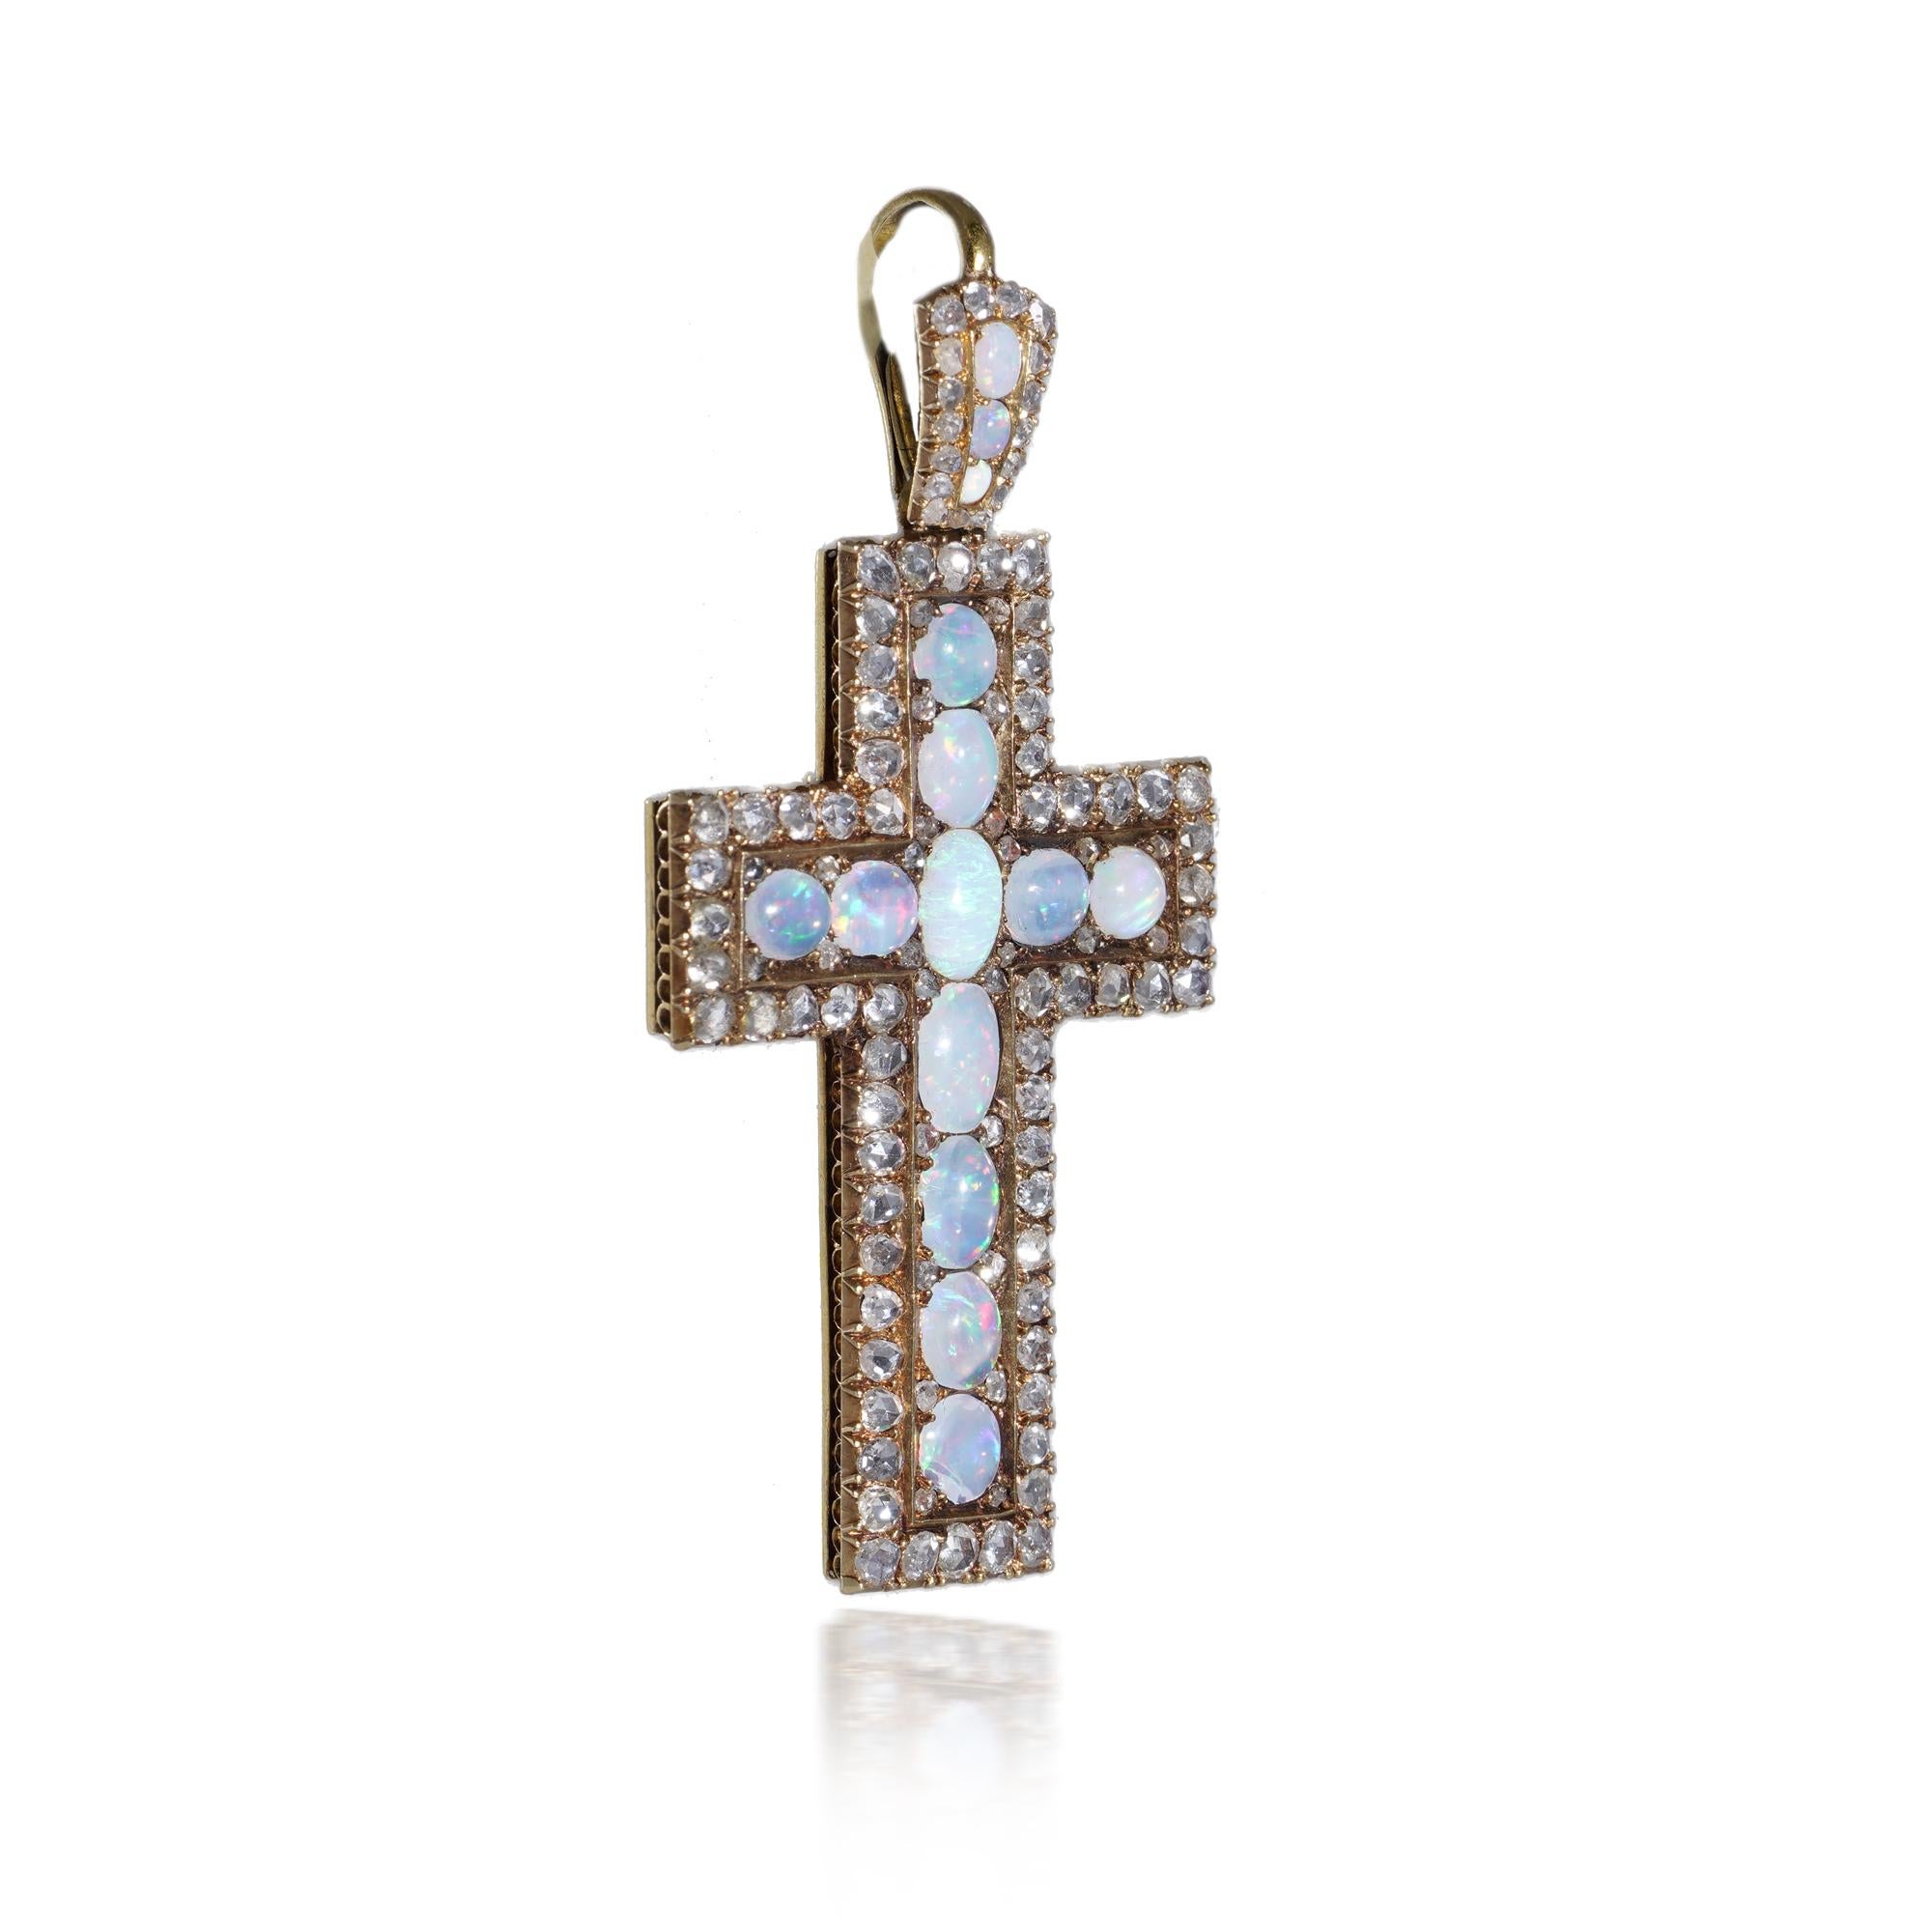 Antique 19th Century 20kt. yellow gold rose-cut diamond and opal cross pendant For Sale 5